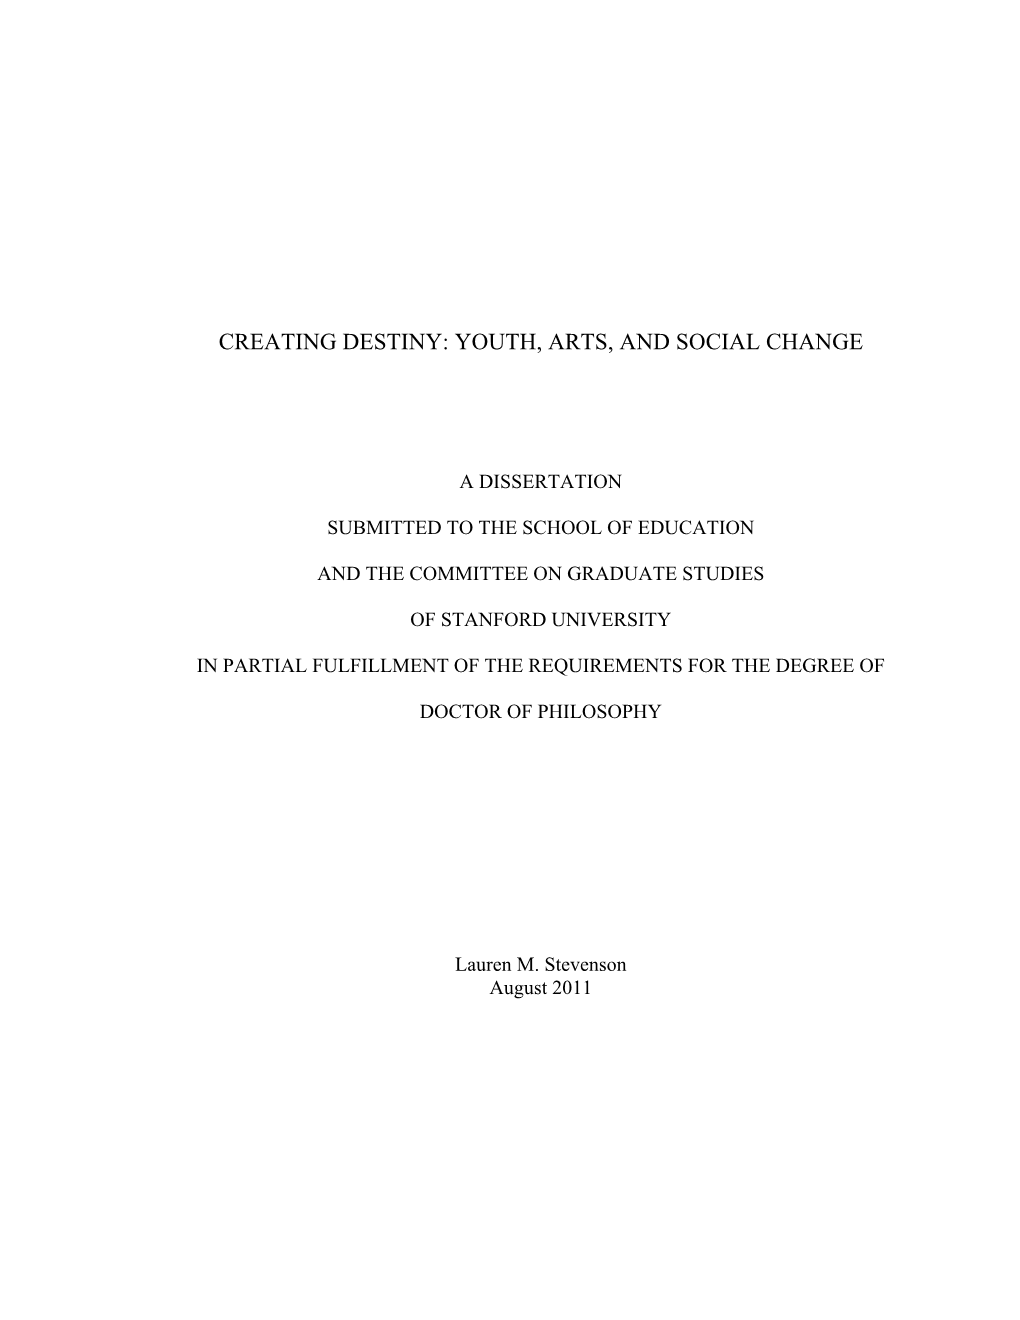 Creating Destiny: Youth, Arts, and Social Change